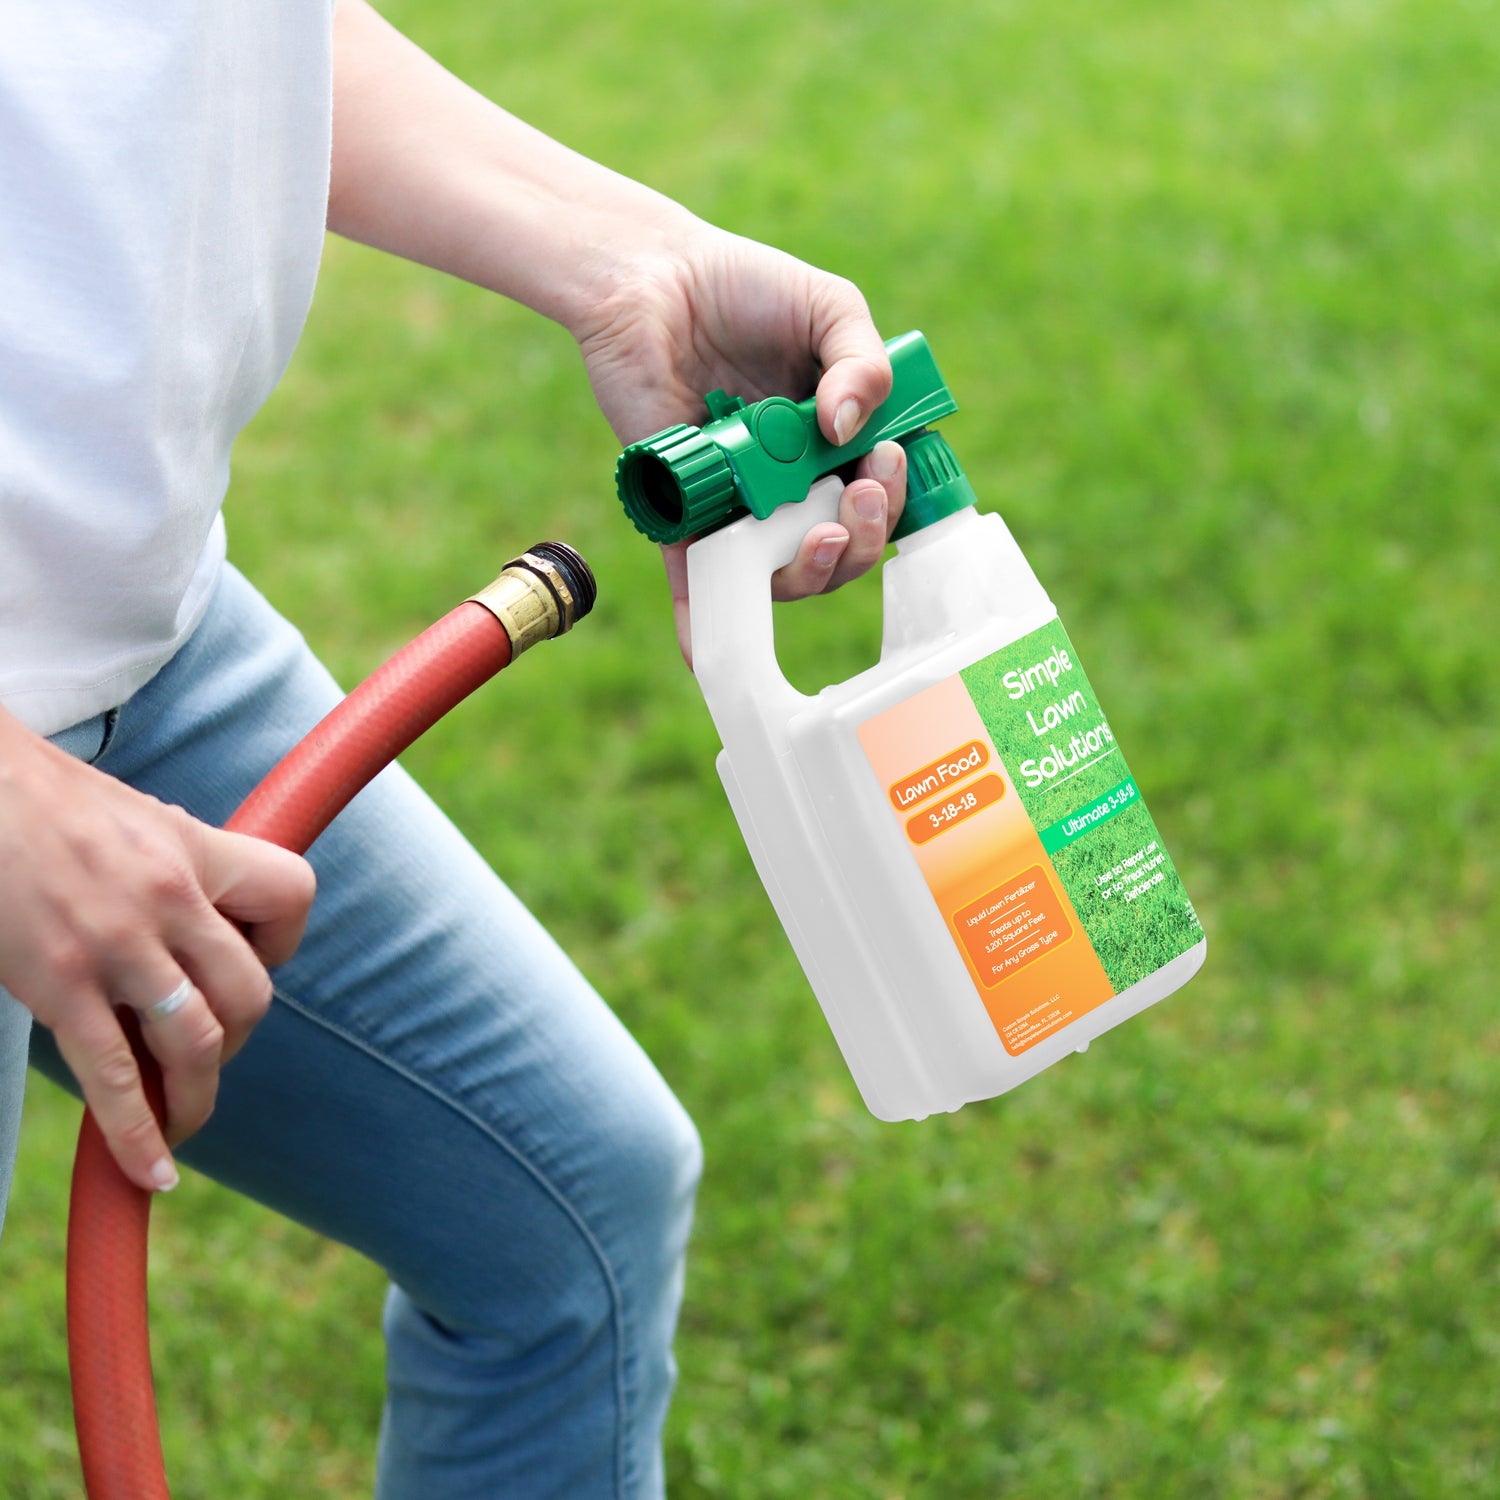 ready to use fall fertilizer for new lawns with hose-end sprayer